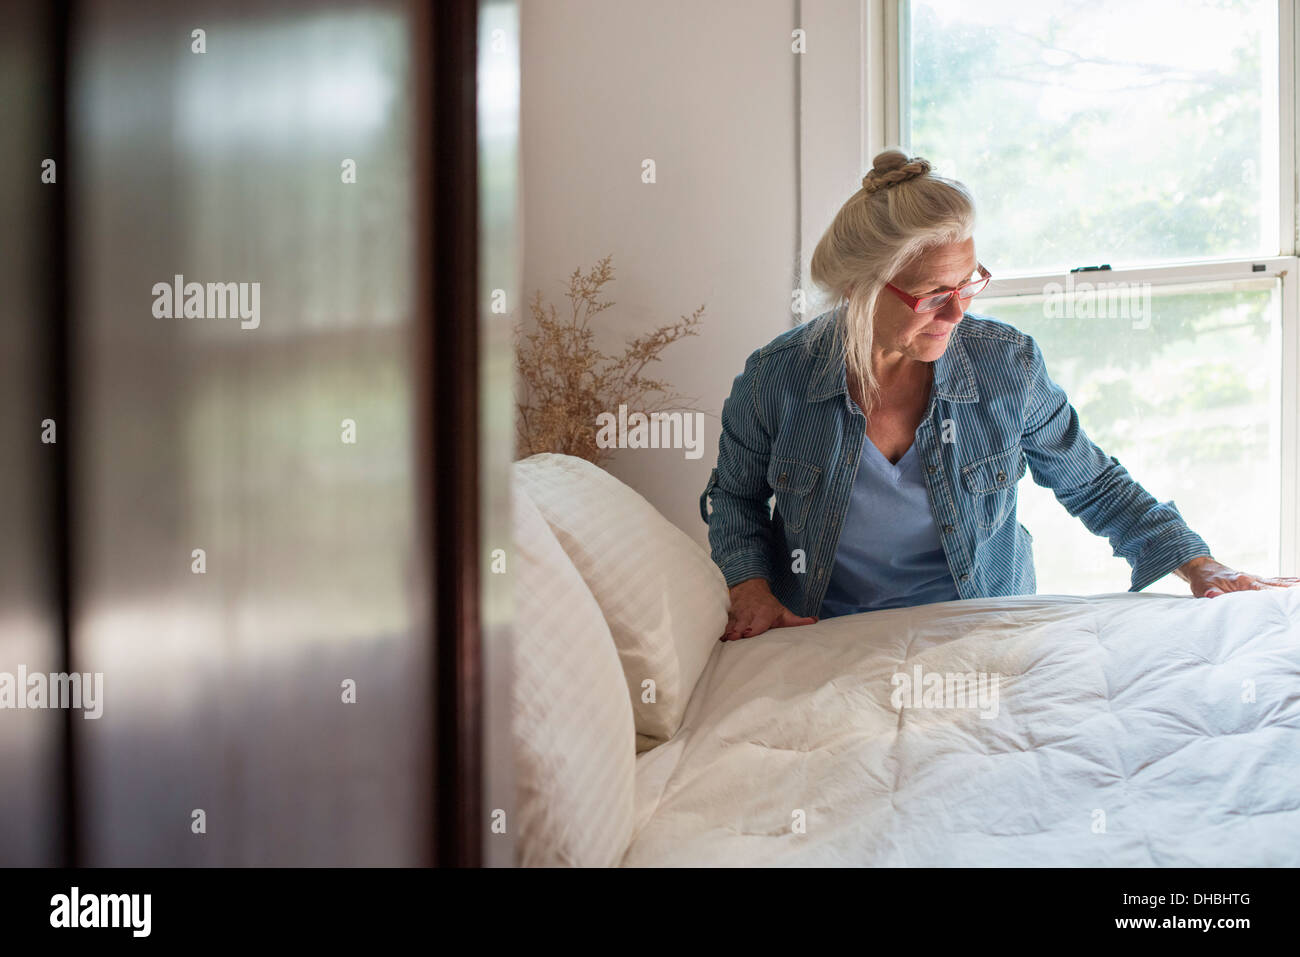 A farmhouse in the country, A woman making up a bed in a bedroom. Stock Photo